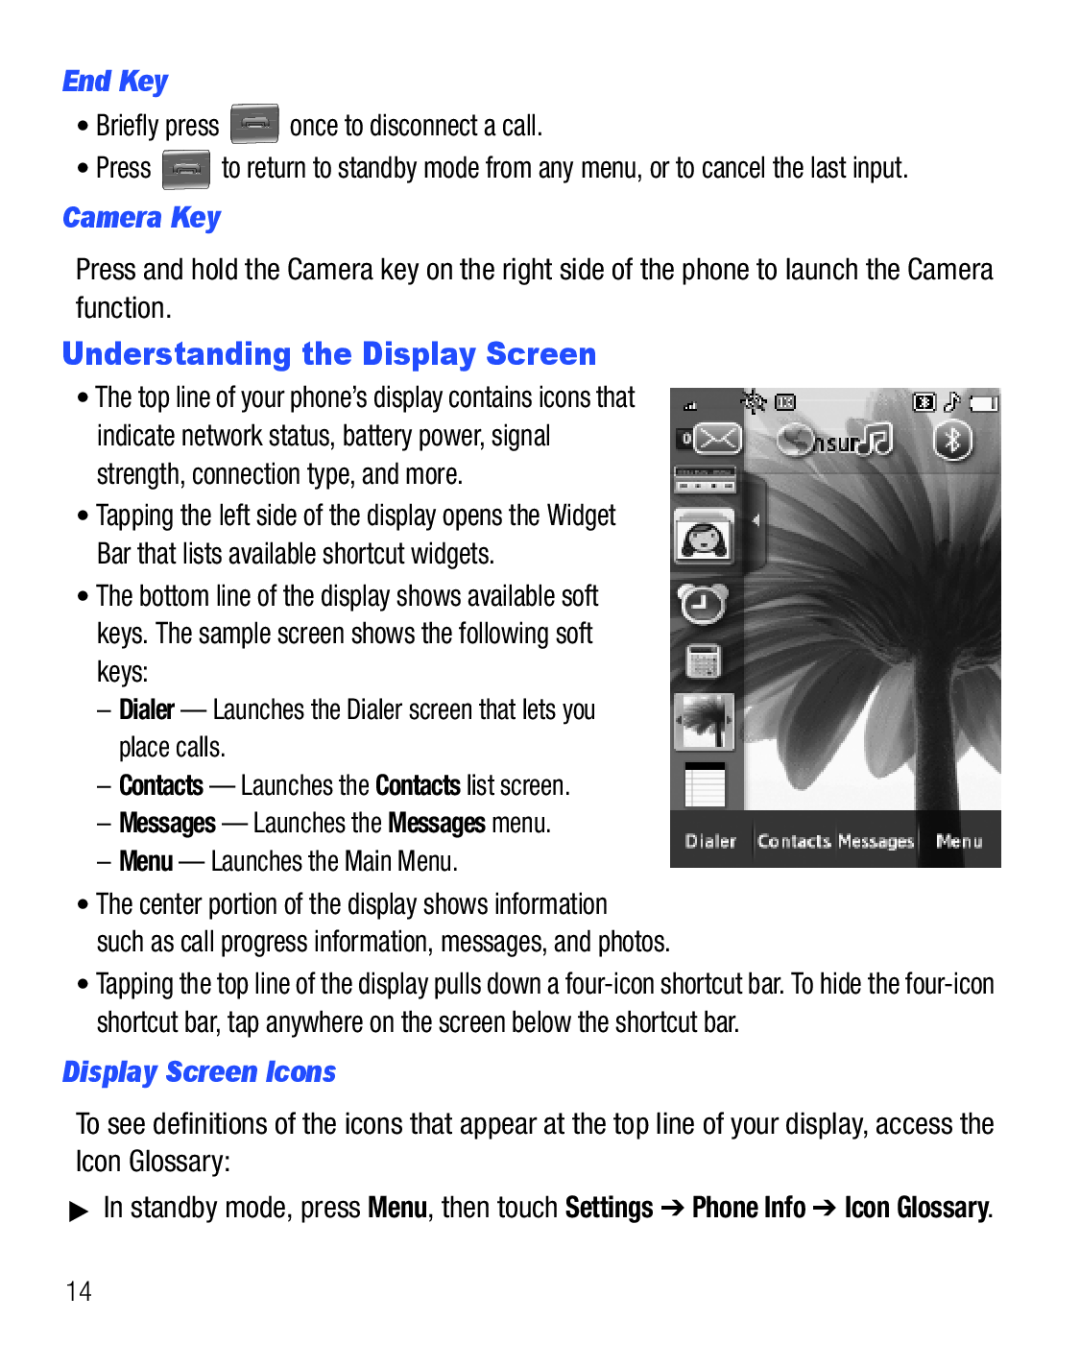 Samsung GH68-25119A user manual Understanding the Display Screen, End Key, Camera Key, Display Screen Icons 